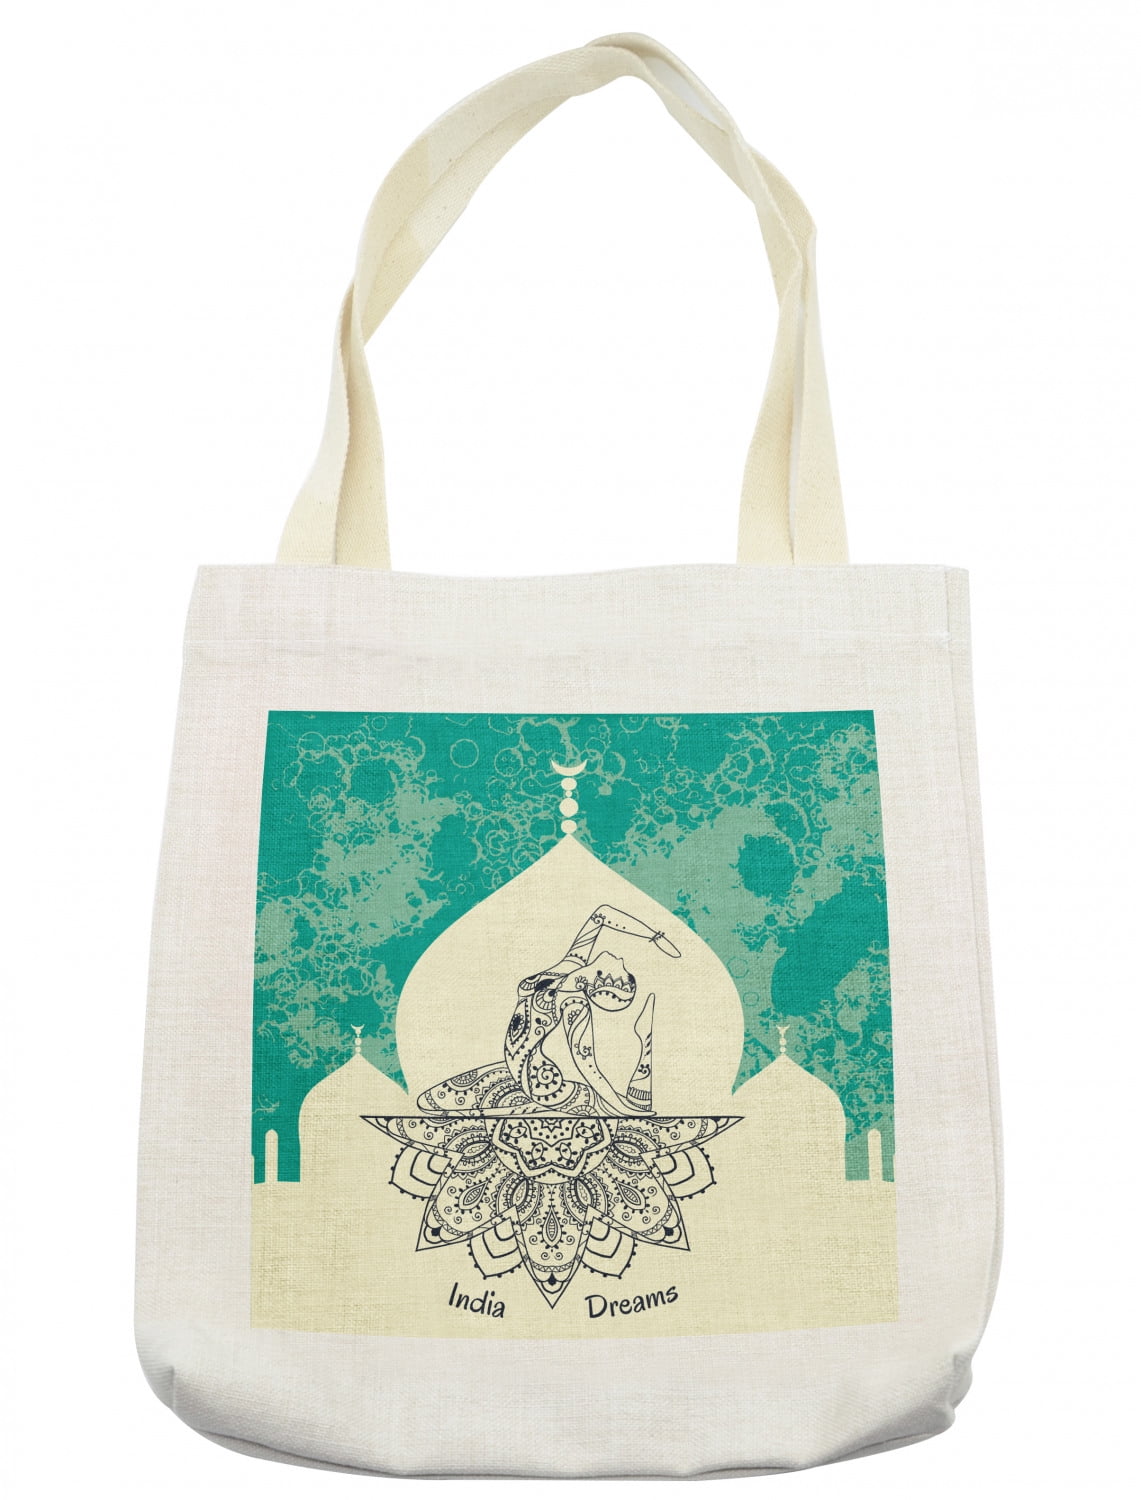 Chakra Tote Bag, Grungy Display Vintage Image with Dancing Lady ...